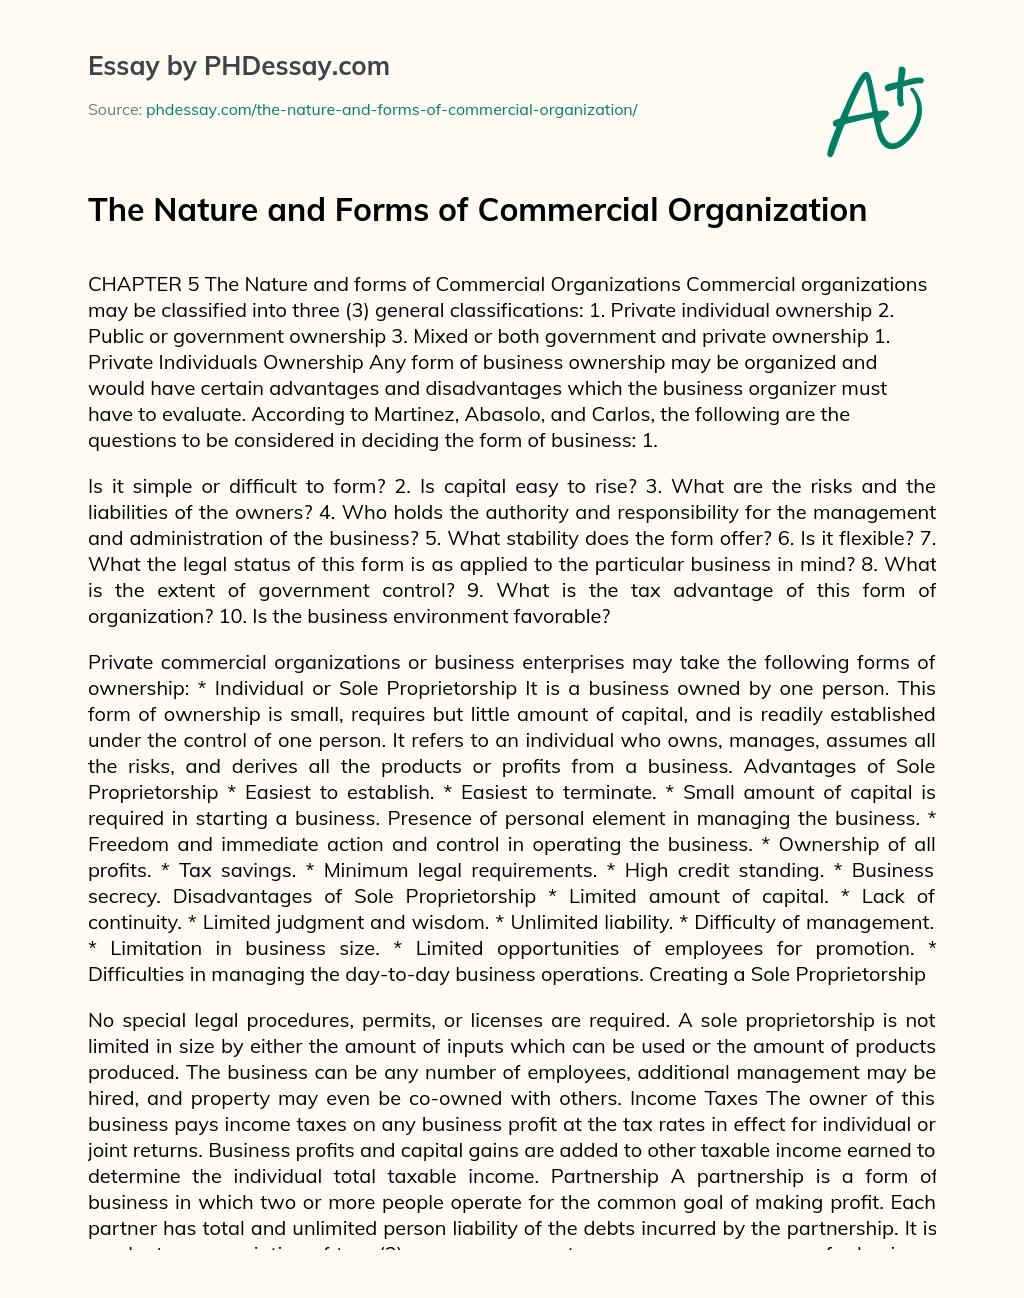 The Nature and Forms of Commercial Organization essay